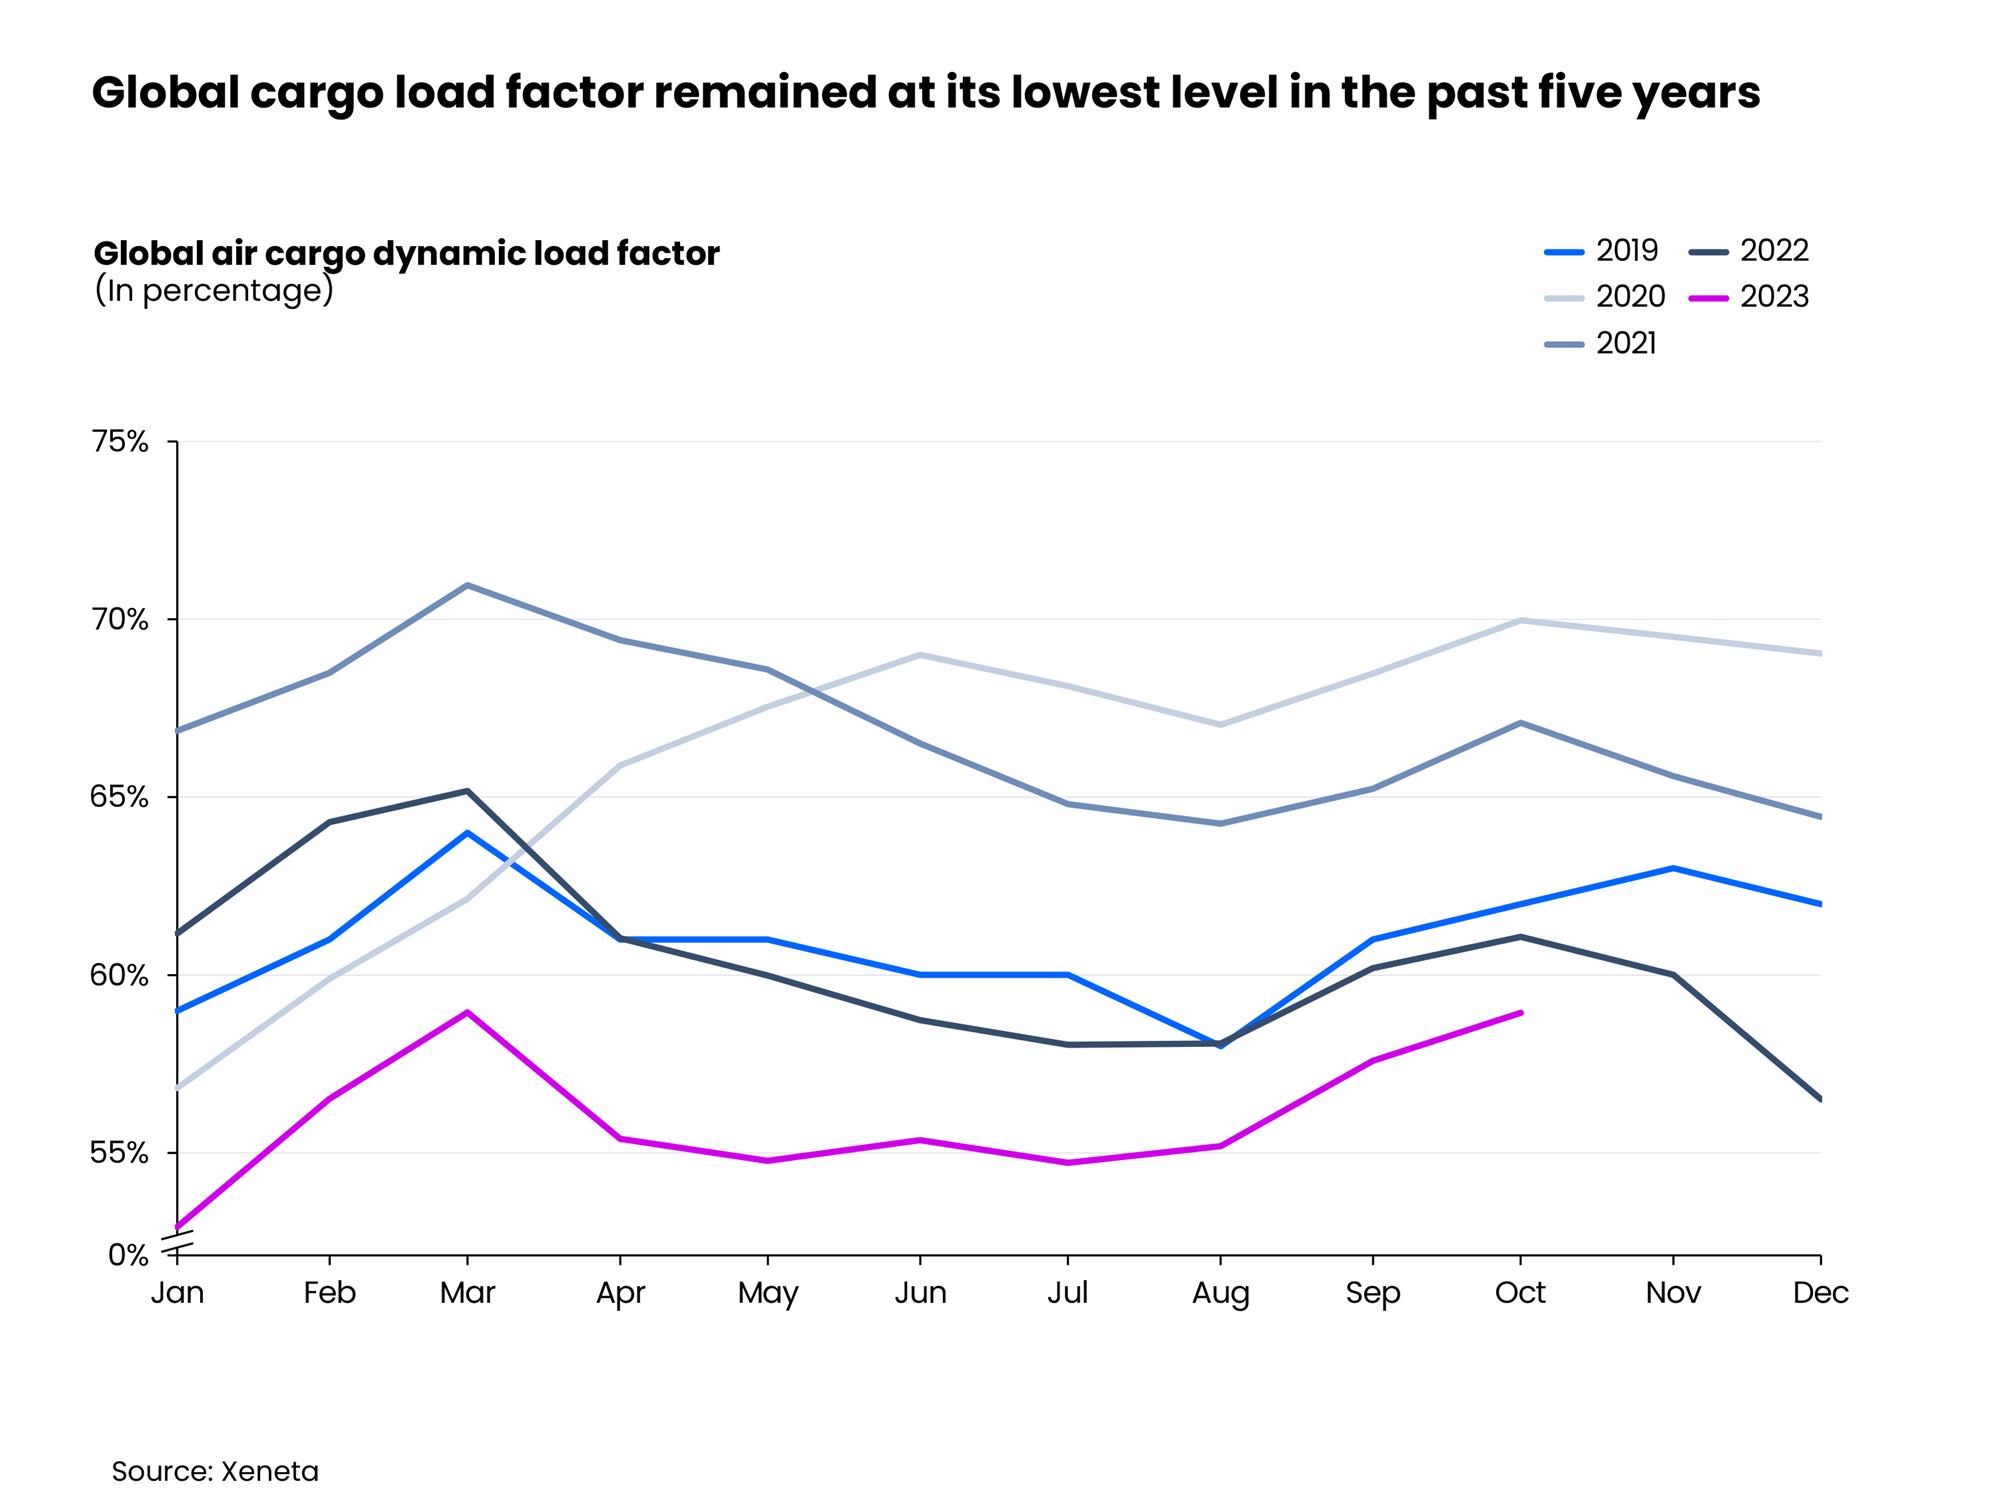 Self Photos / Files - Global cargo load factor remained at its lowest level in the past five years